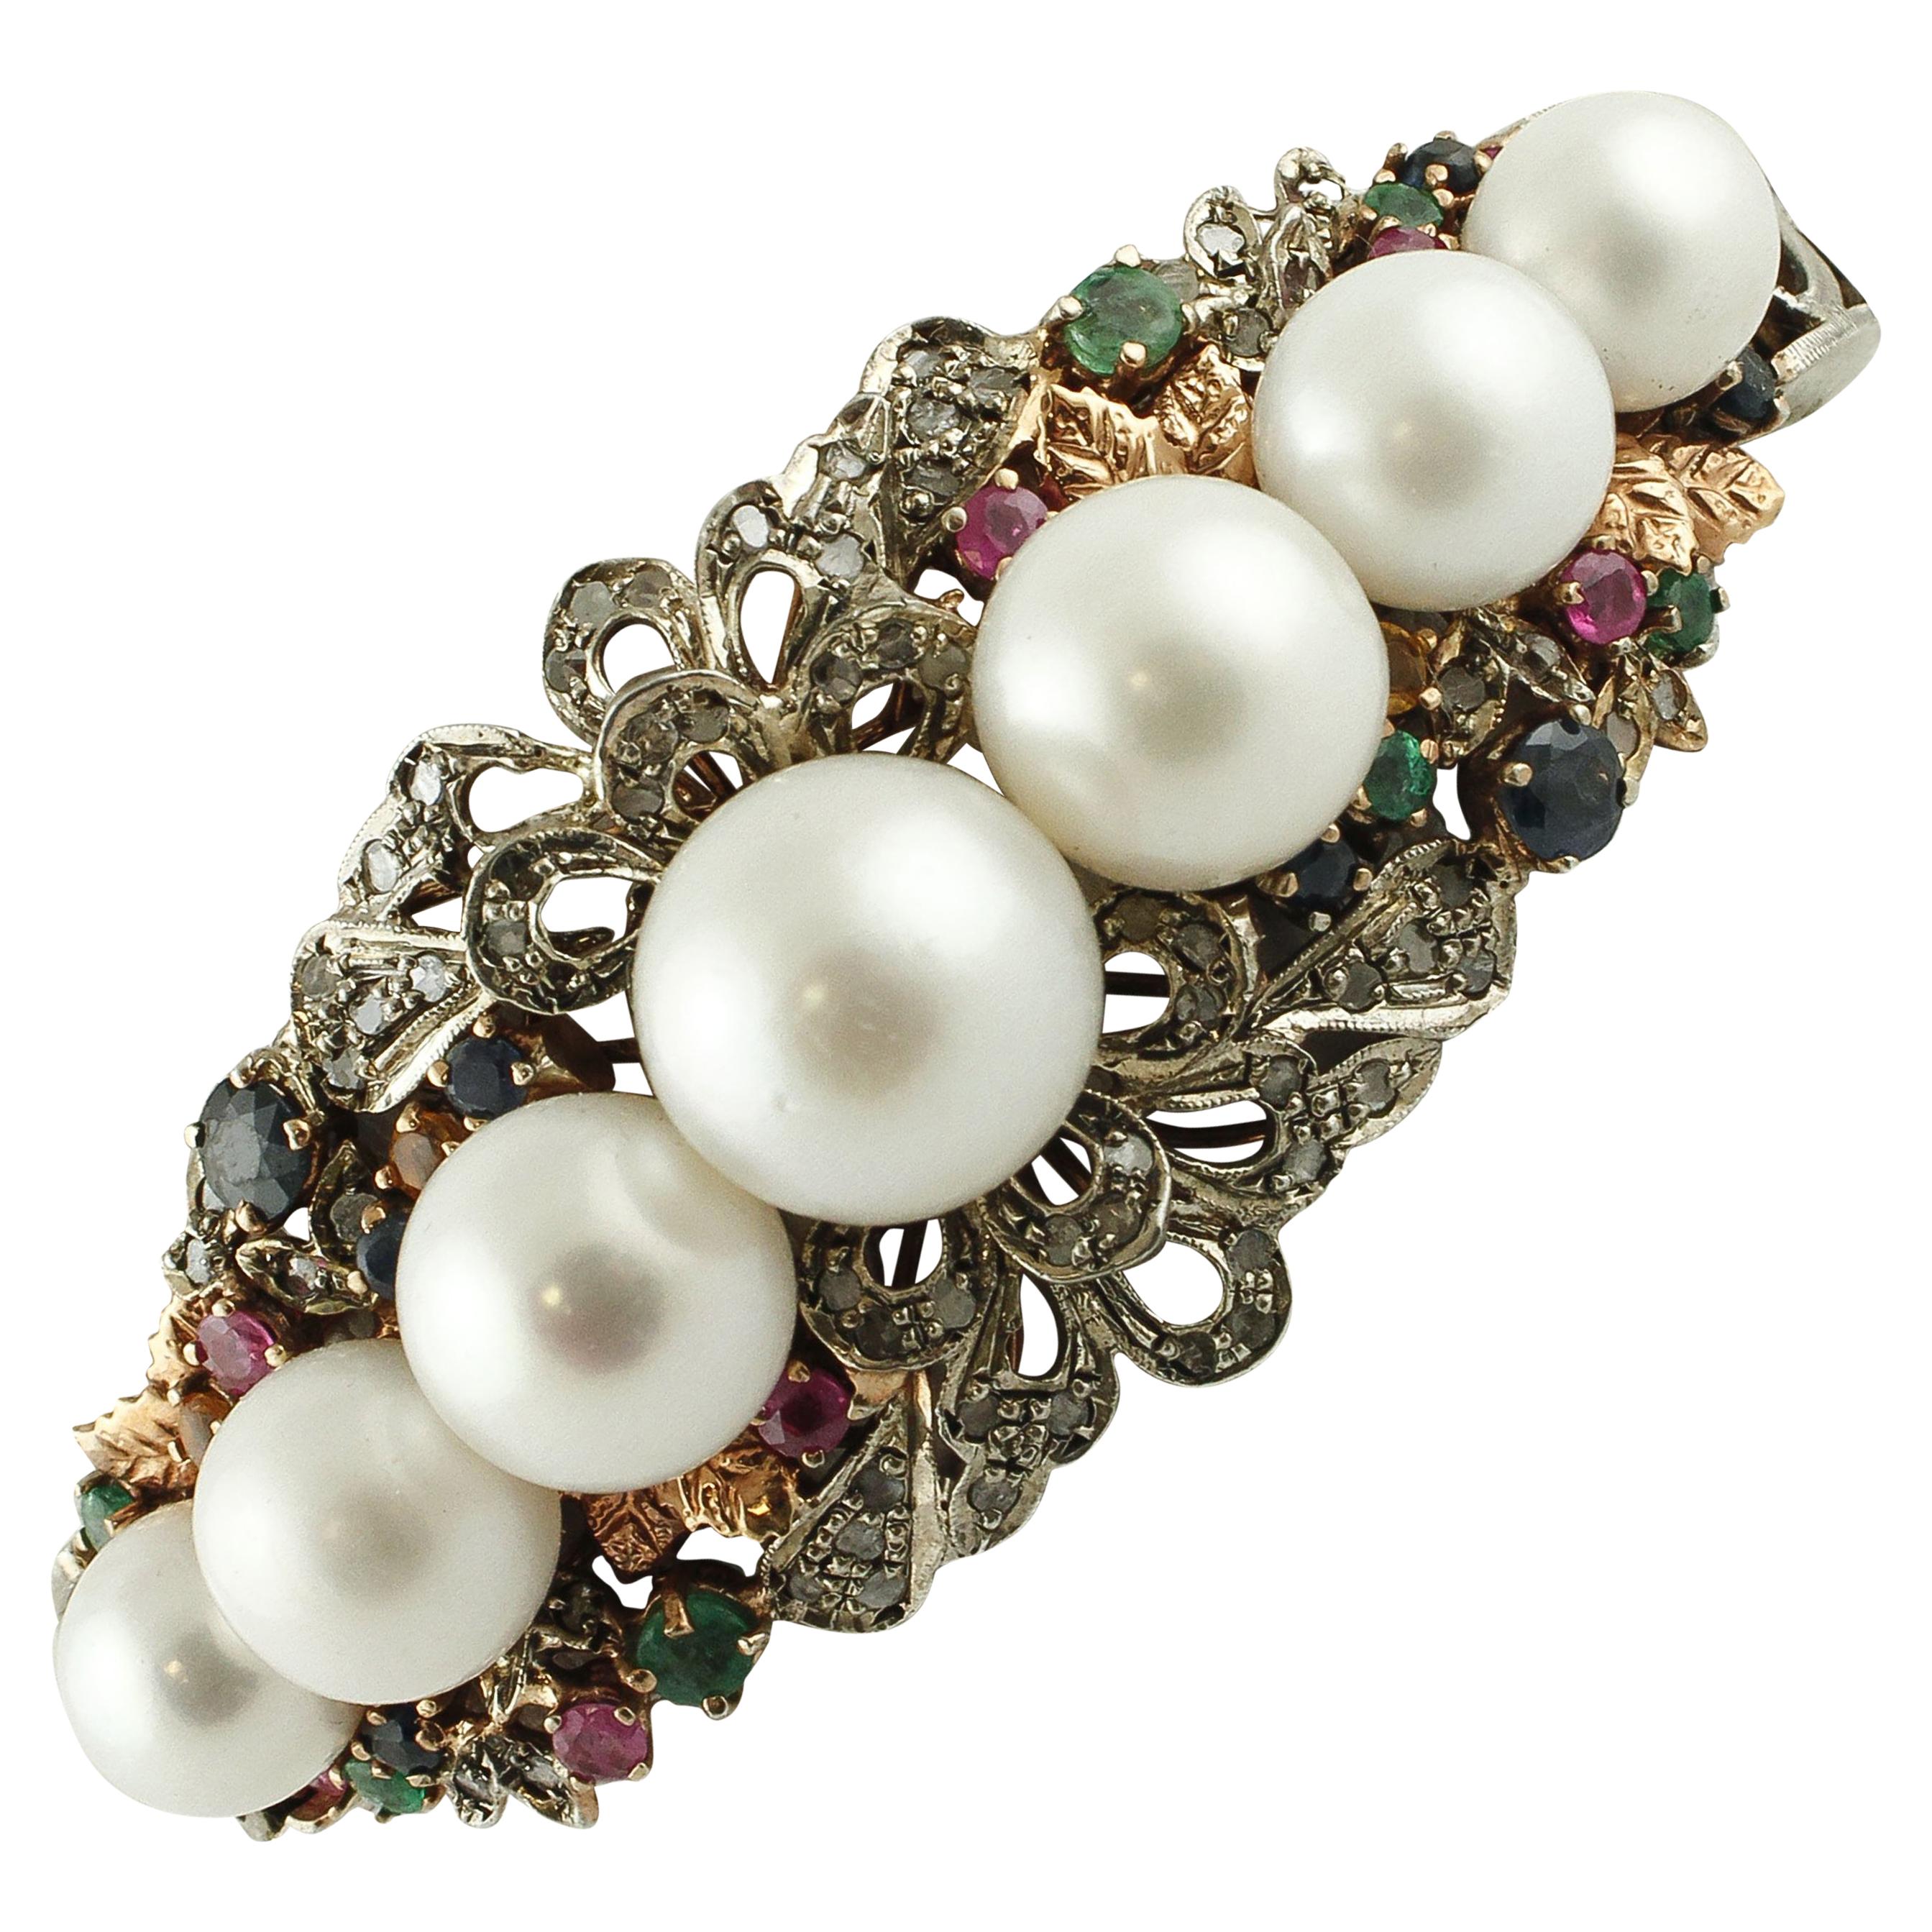 Diamonds Rubies Emeralds Sapphires Pearls Rose Gold and Silver Rigid Bracelet